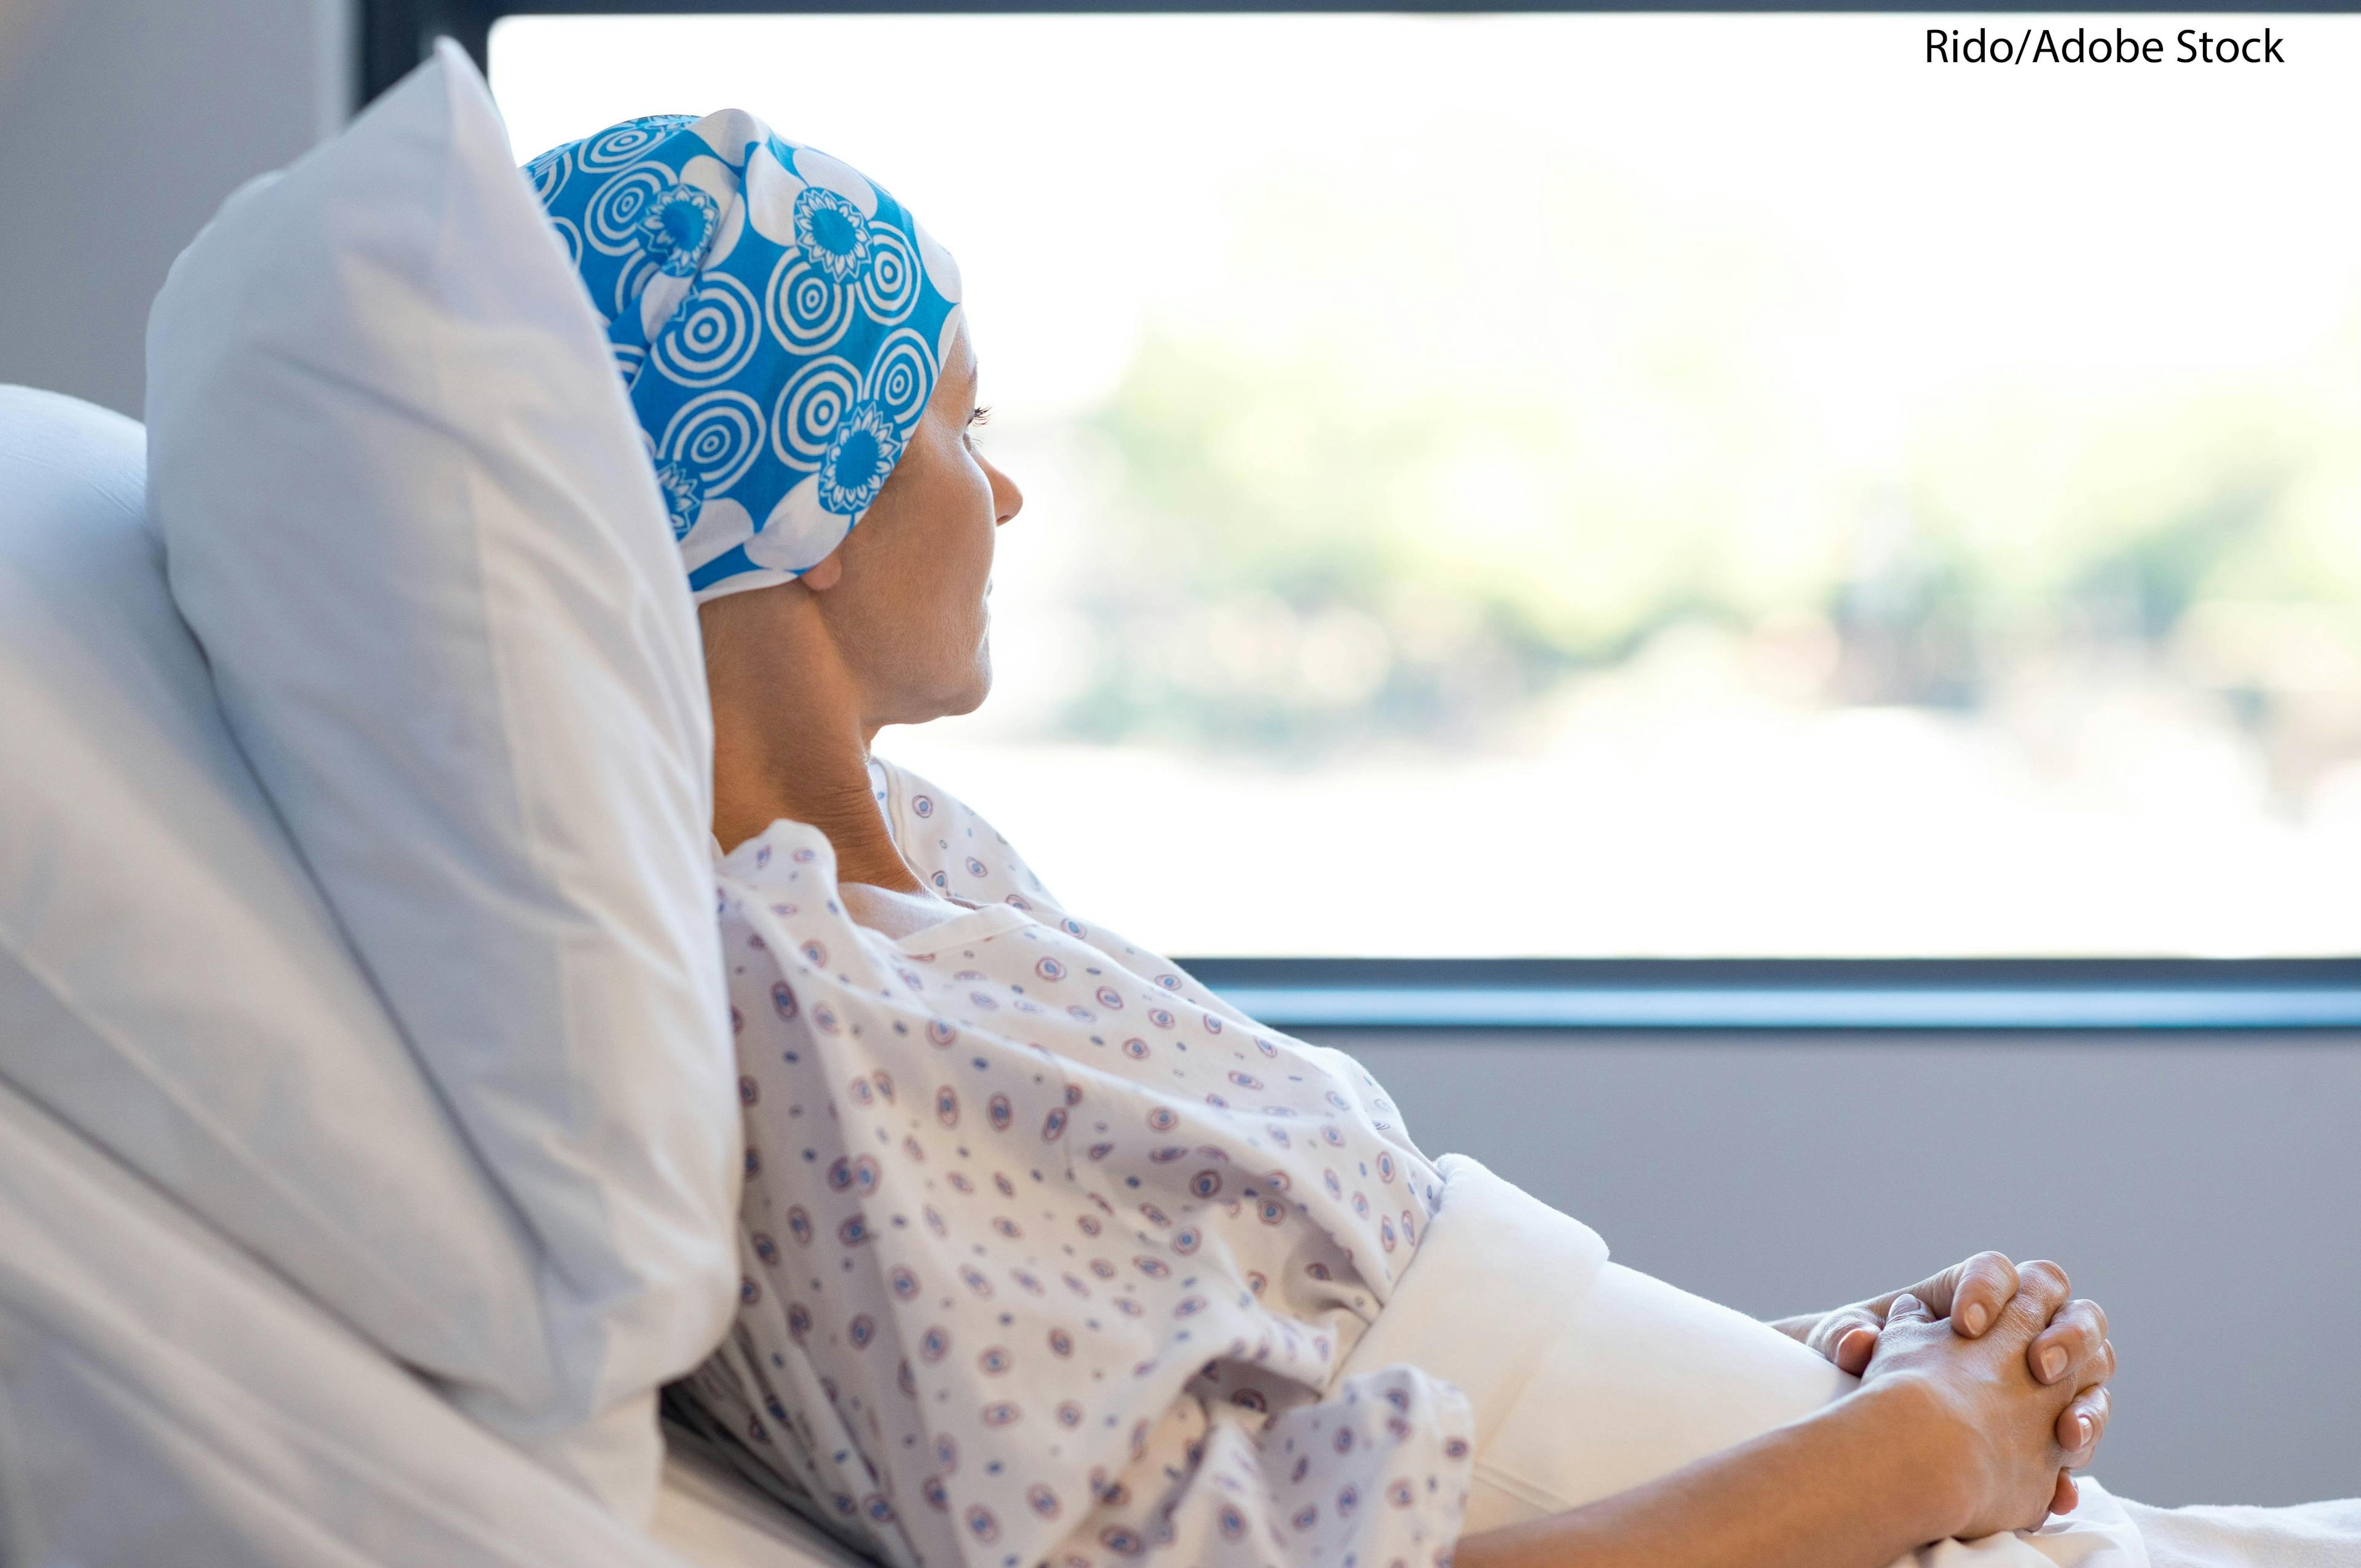 What Characterizes Breast Cancer in Adolescent and Young Adult Patients?